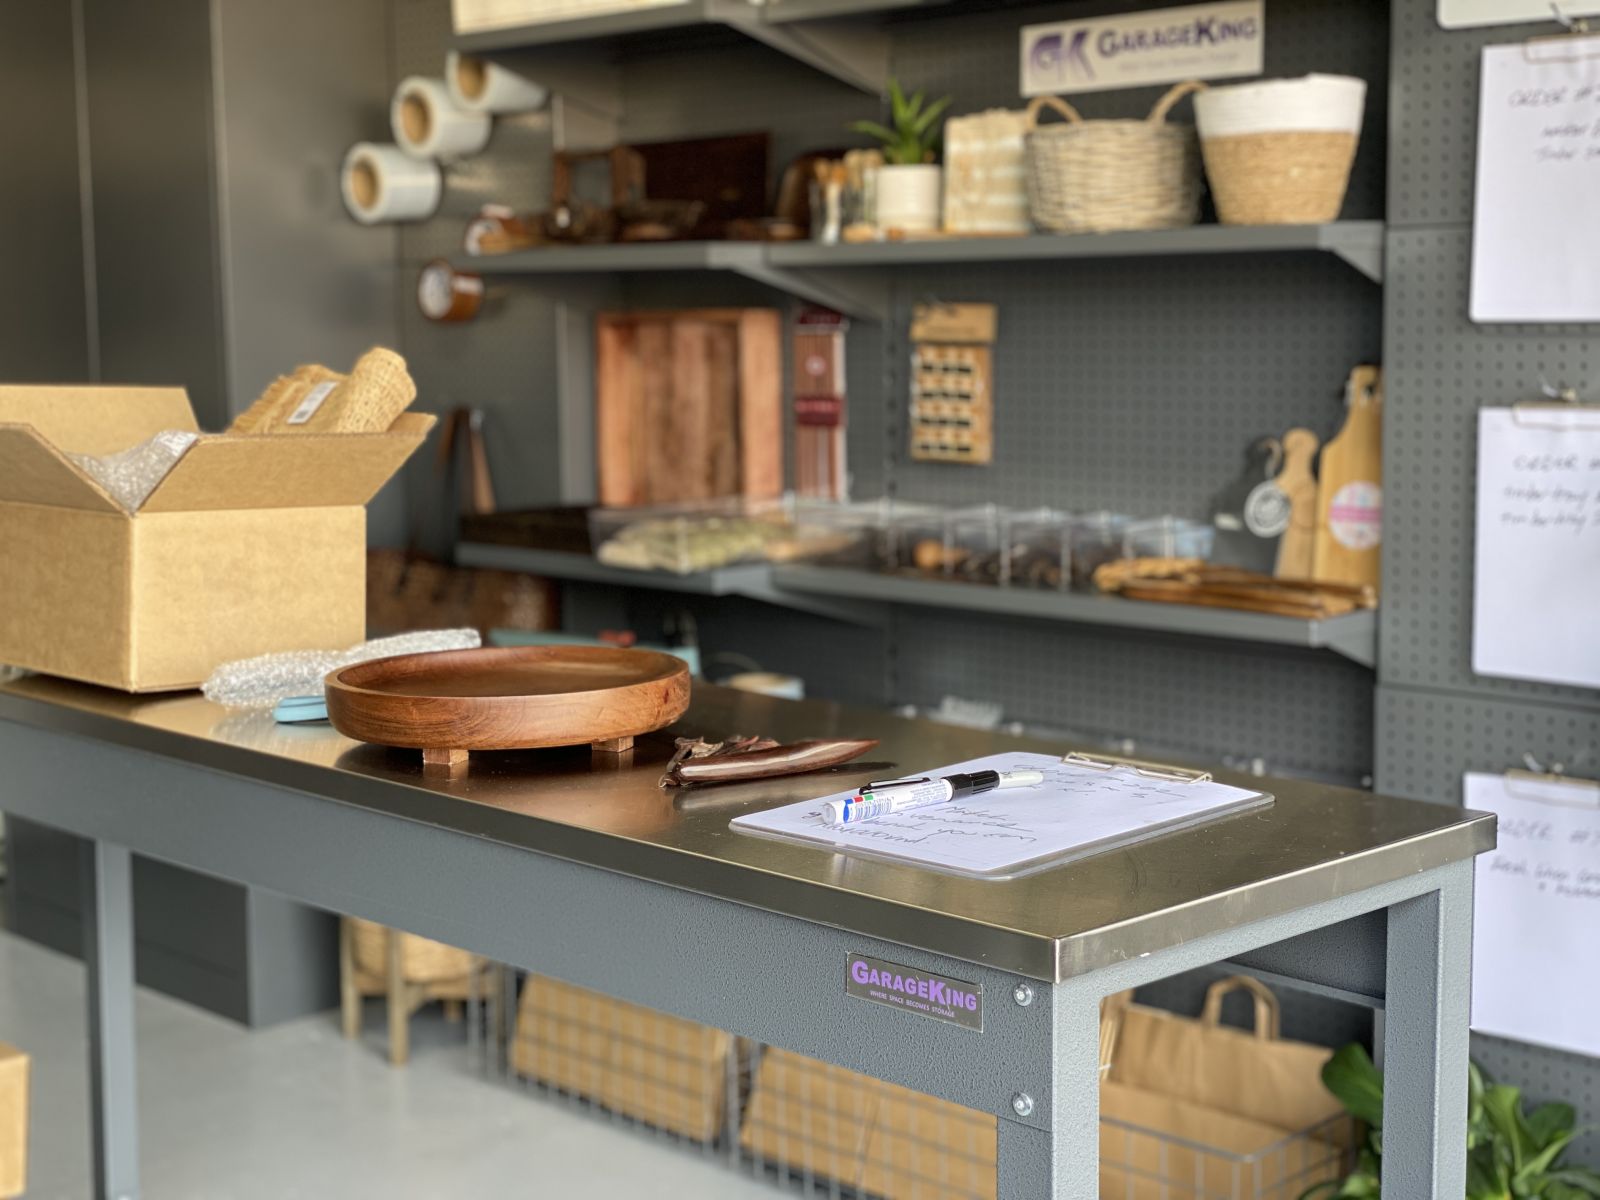 A stainless steel workbench with garage stooging shelves set up as a homewares business